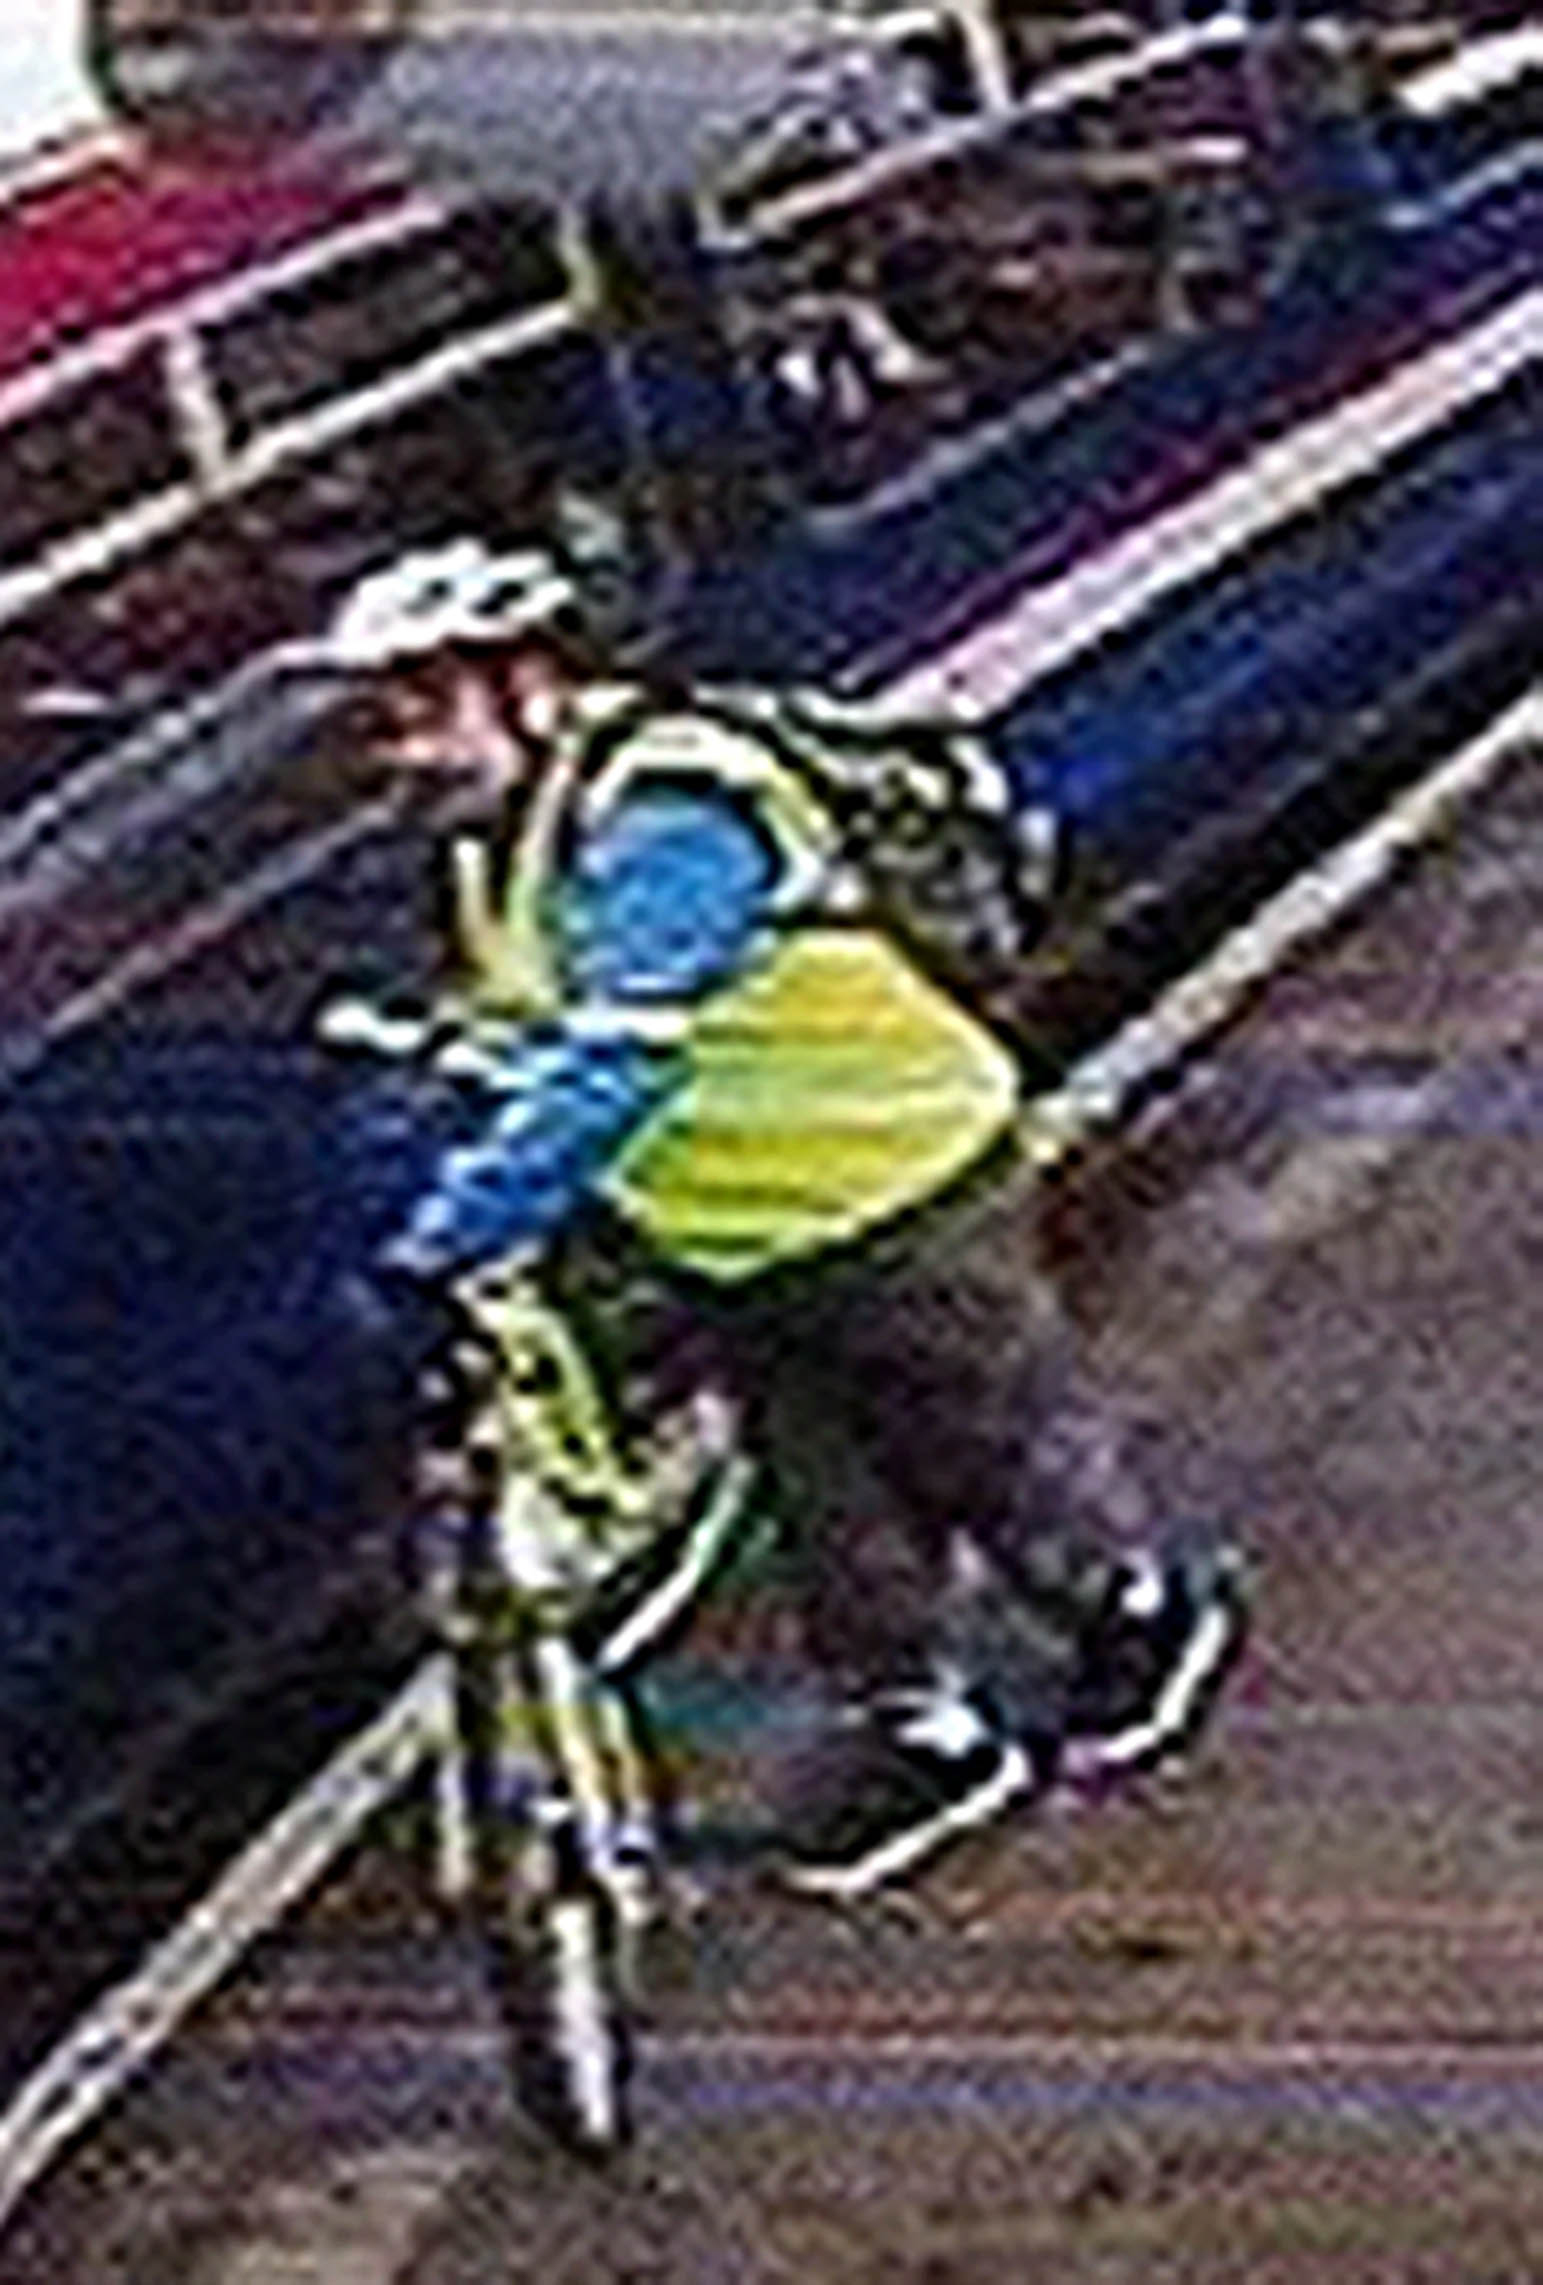 <em>Tony Parsons was last seen on the charity bike ride and was reported missing on October 2, 2017. by Police Scotland</em>.” /><span class=